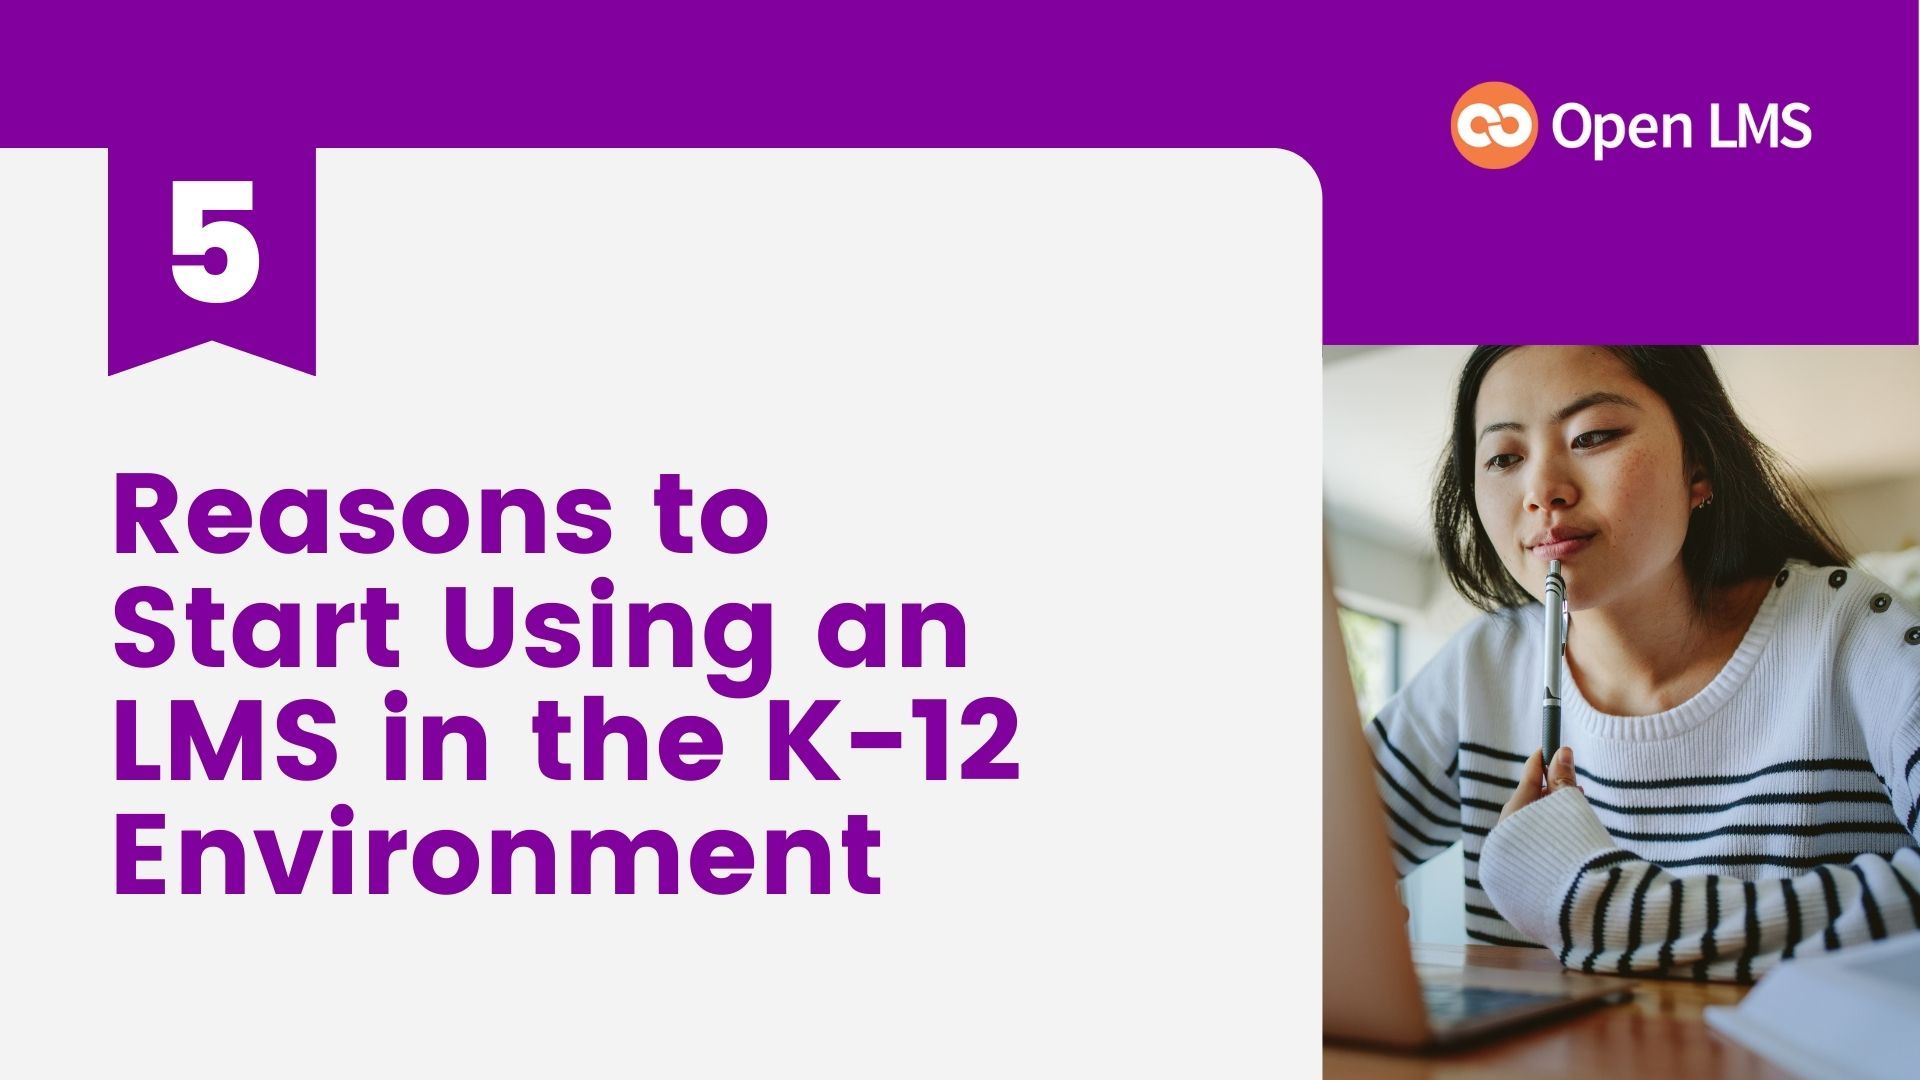 5 Reasons to Start Using an LMS in the K-12 Environment